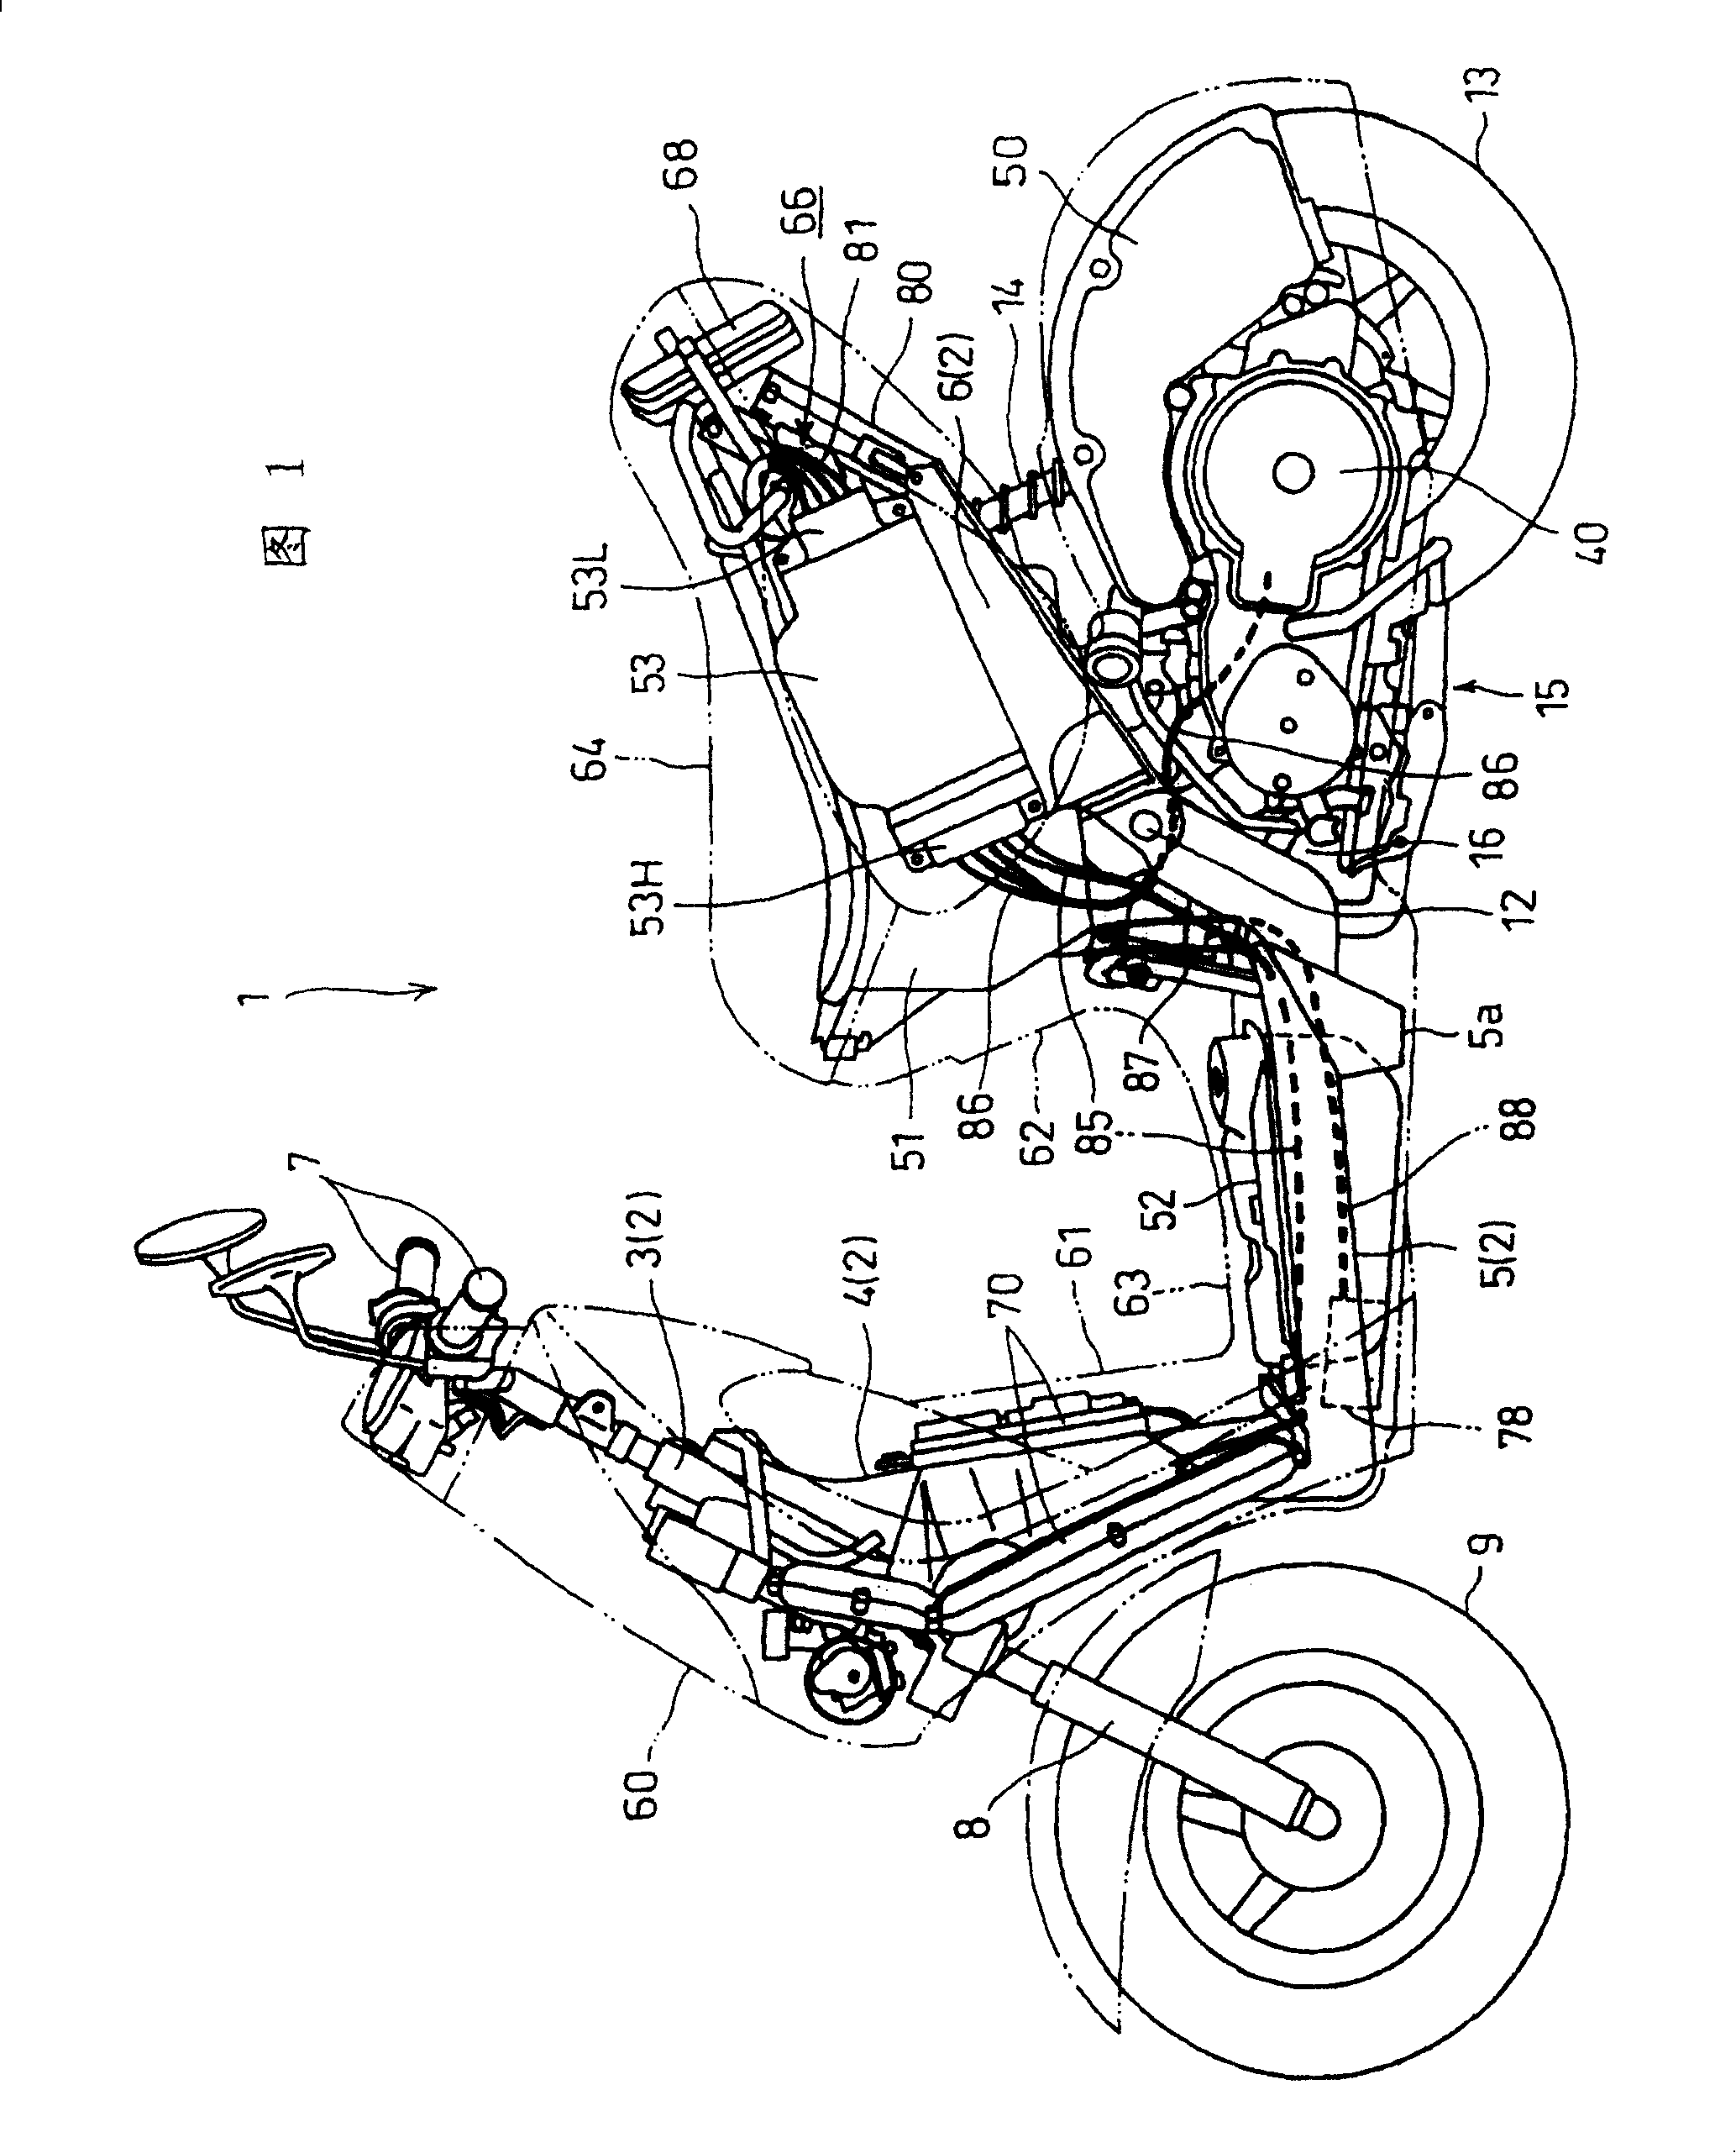 The wiring harness structure of electric motorcycle